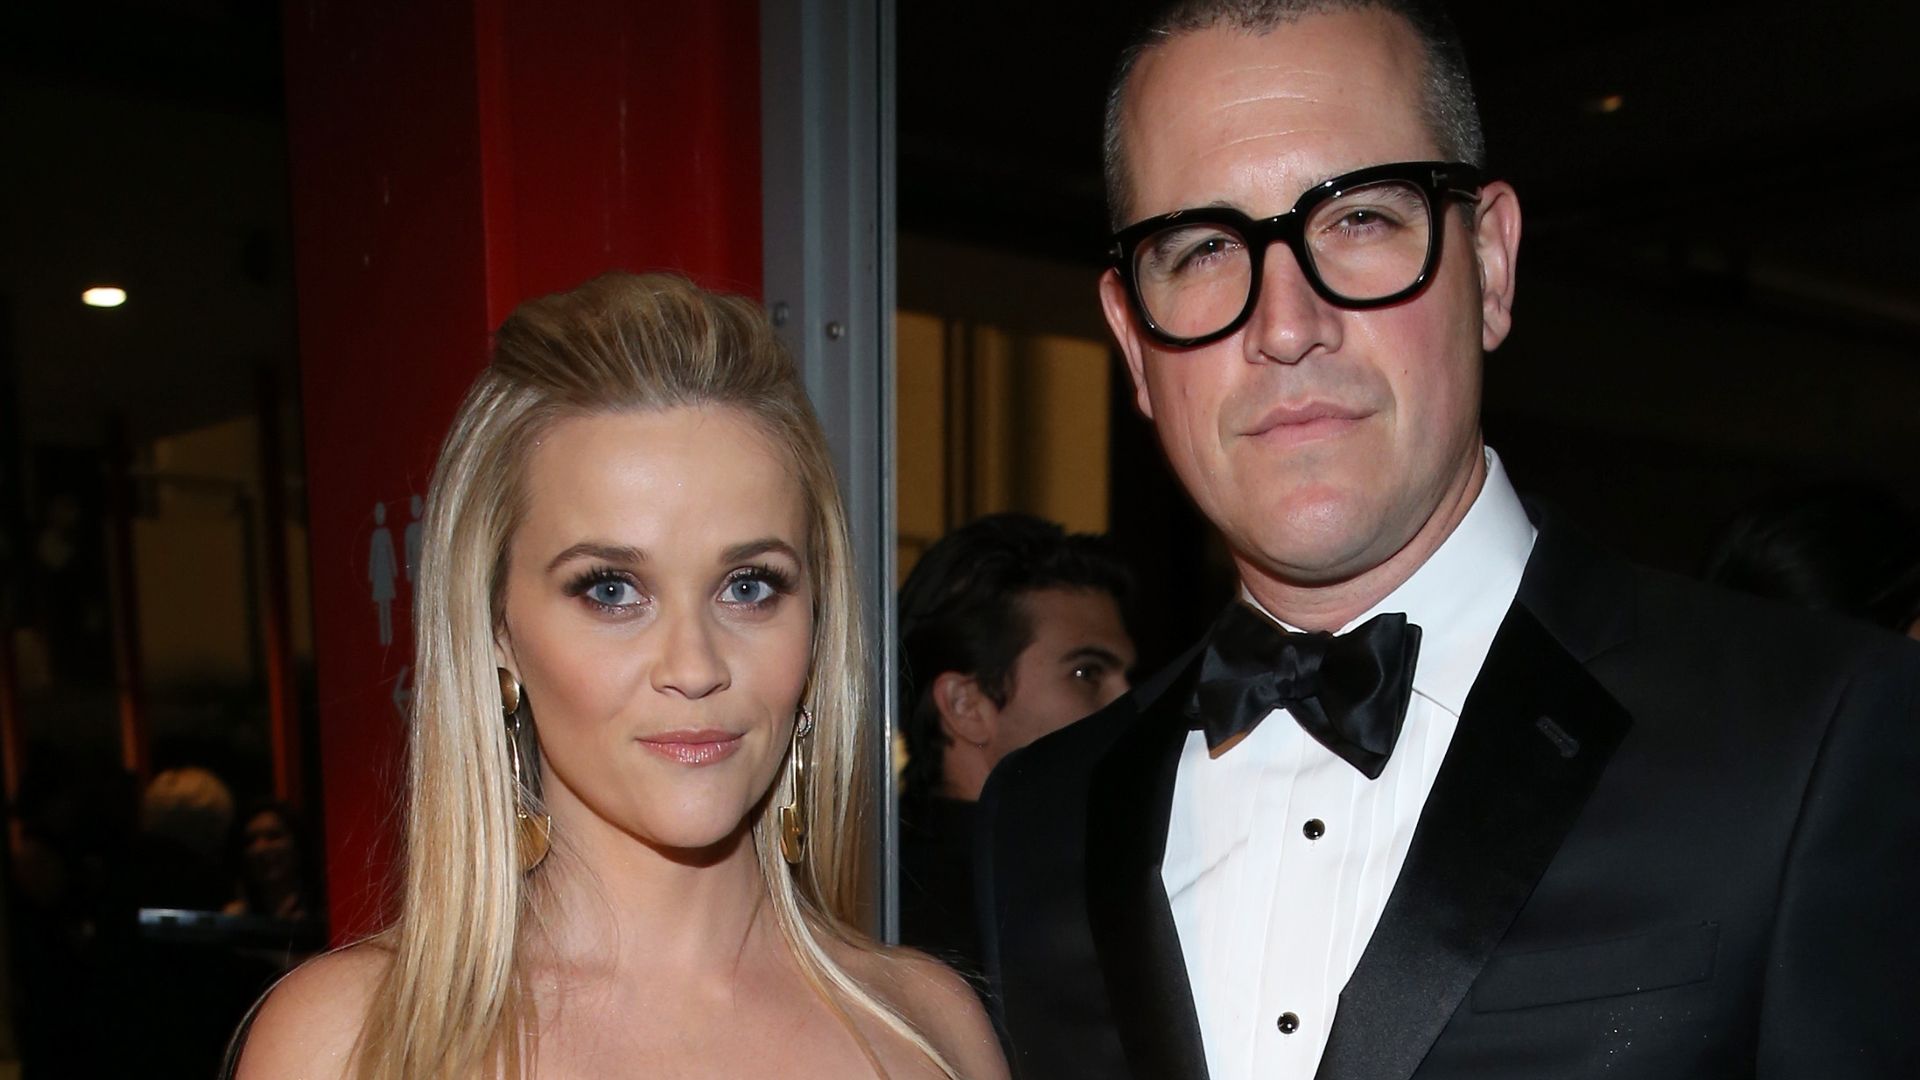 Reese Witherspoon in a black dress and Jim Toth in a suit attend LACMA 2015 Art+Film Gala 